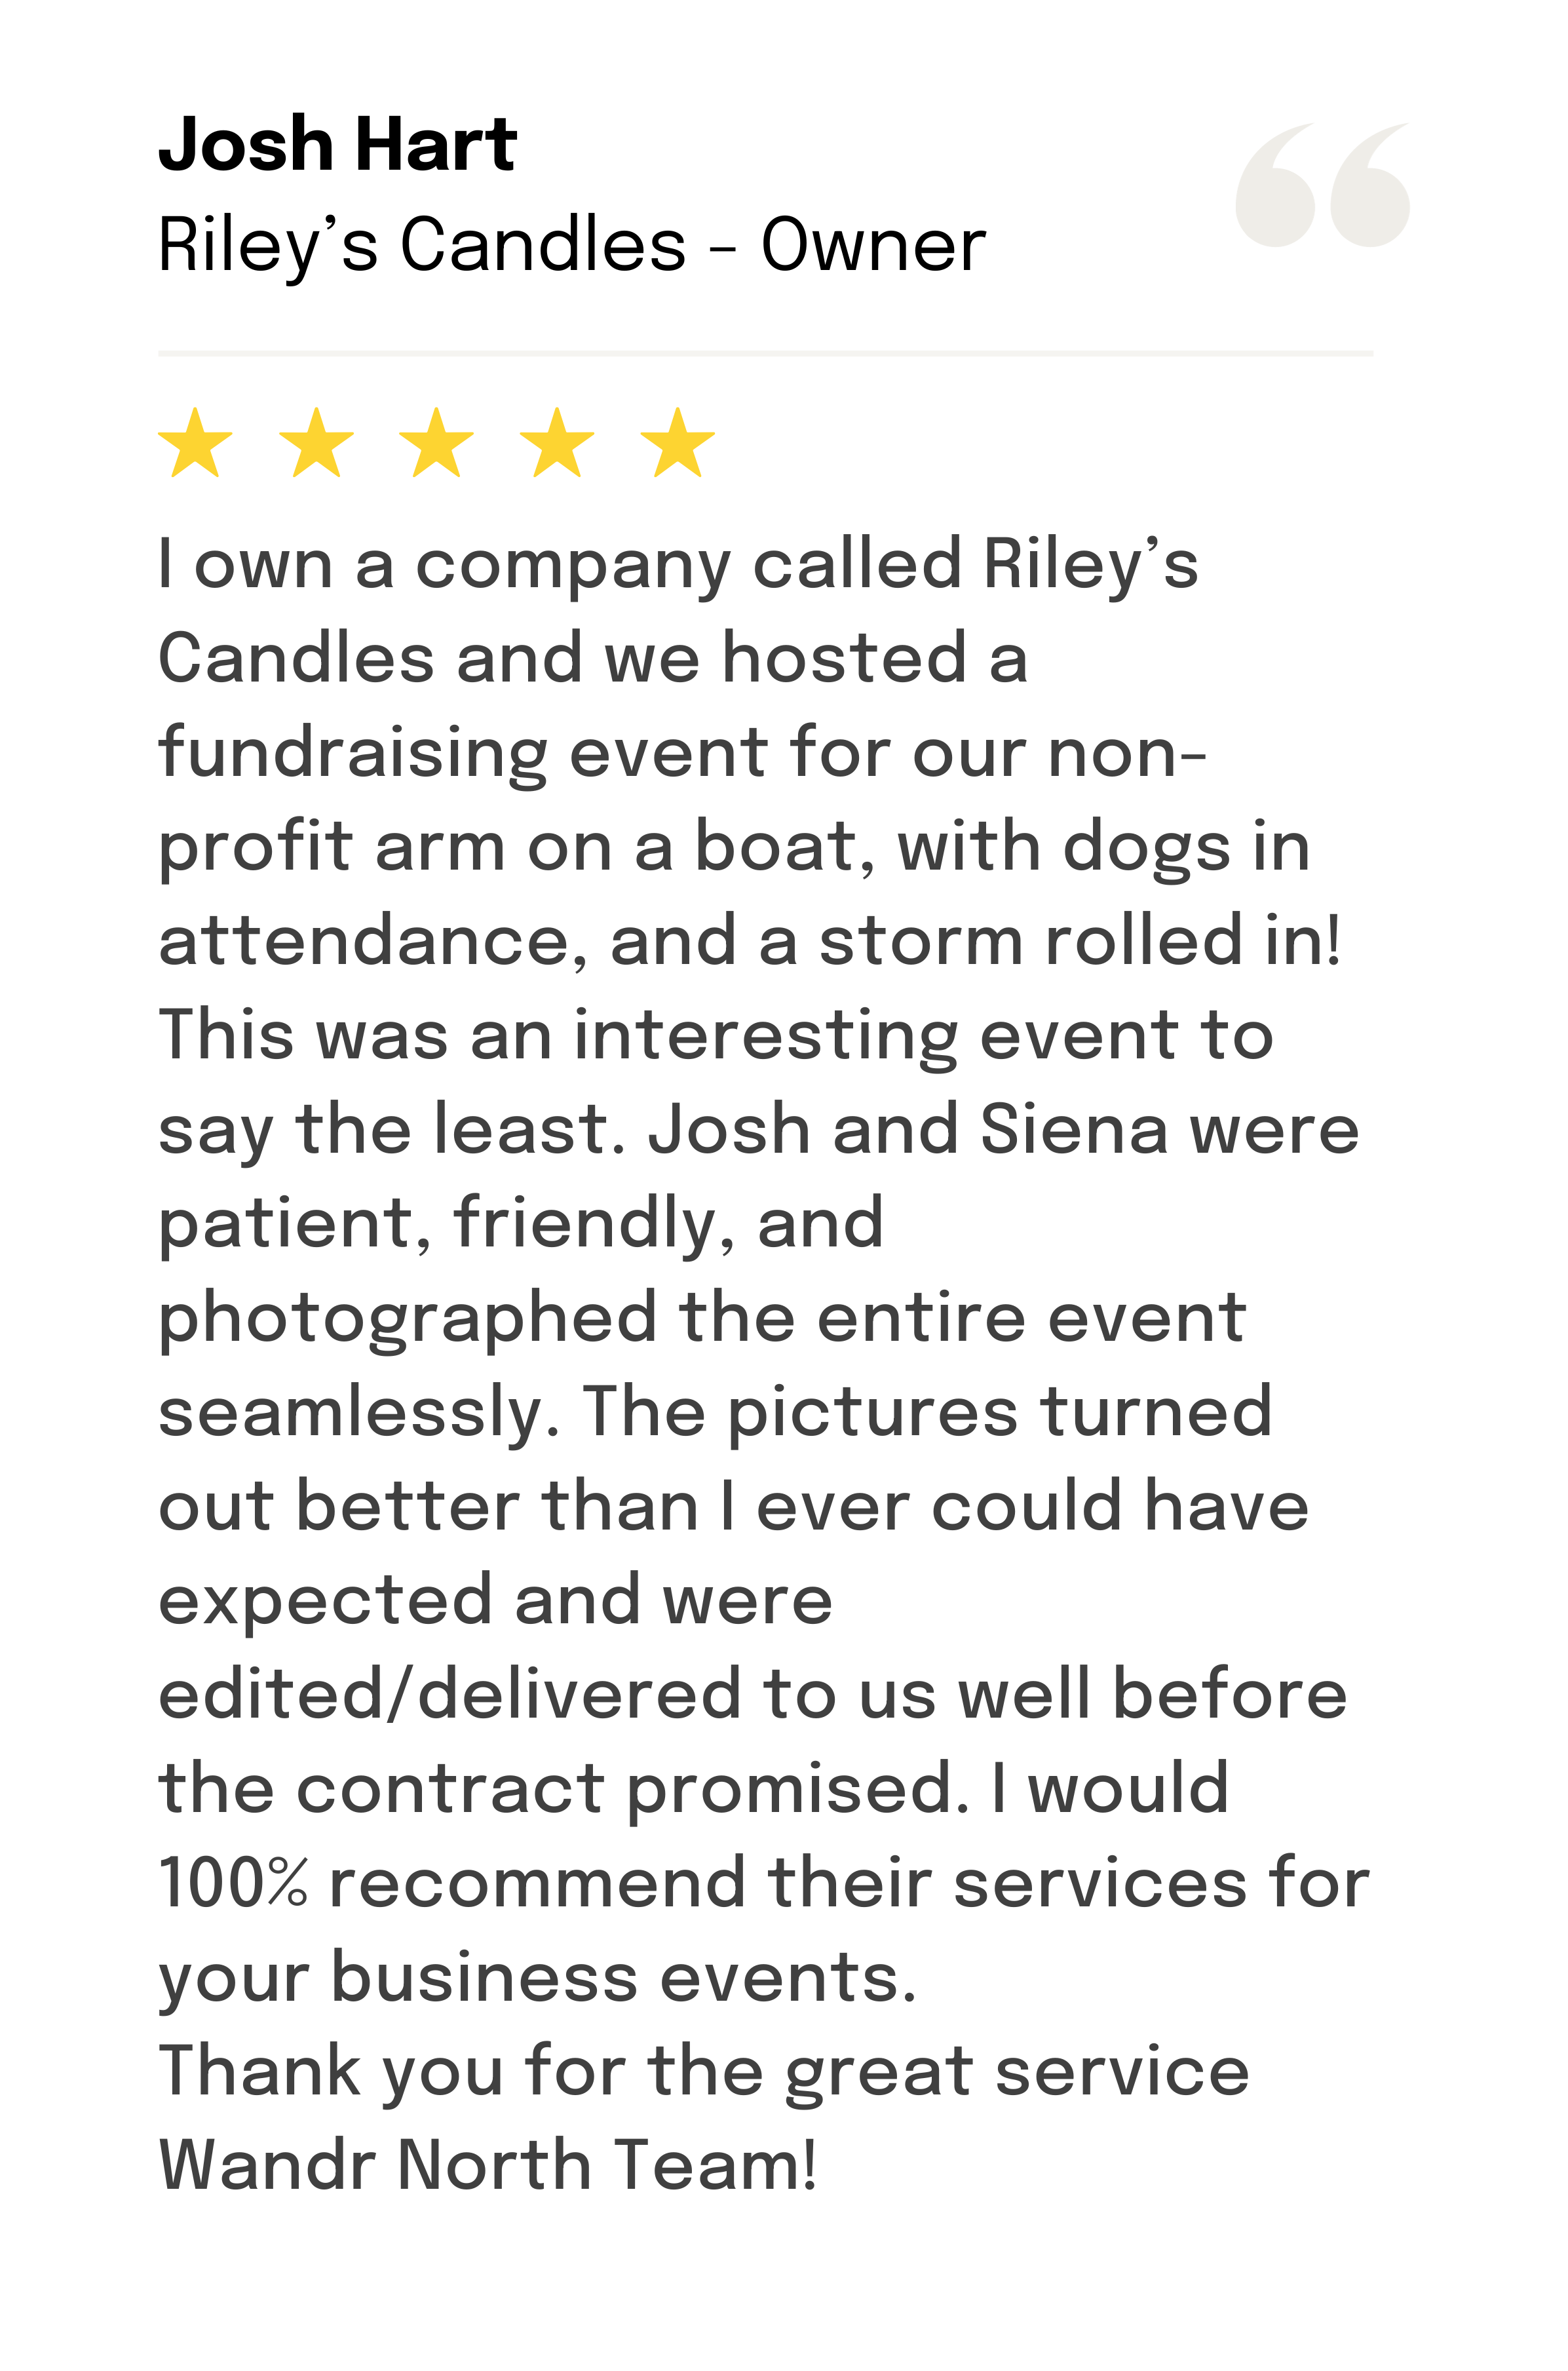 Riley's Candles writes a 5-star review to Wandr North for their commercial photography services.